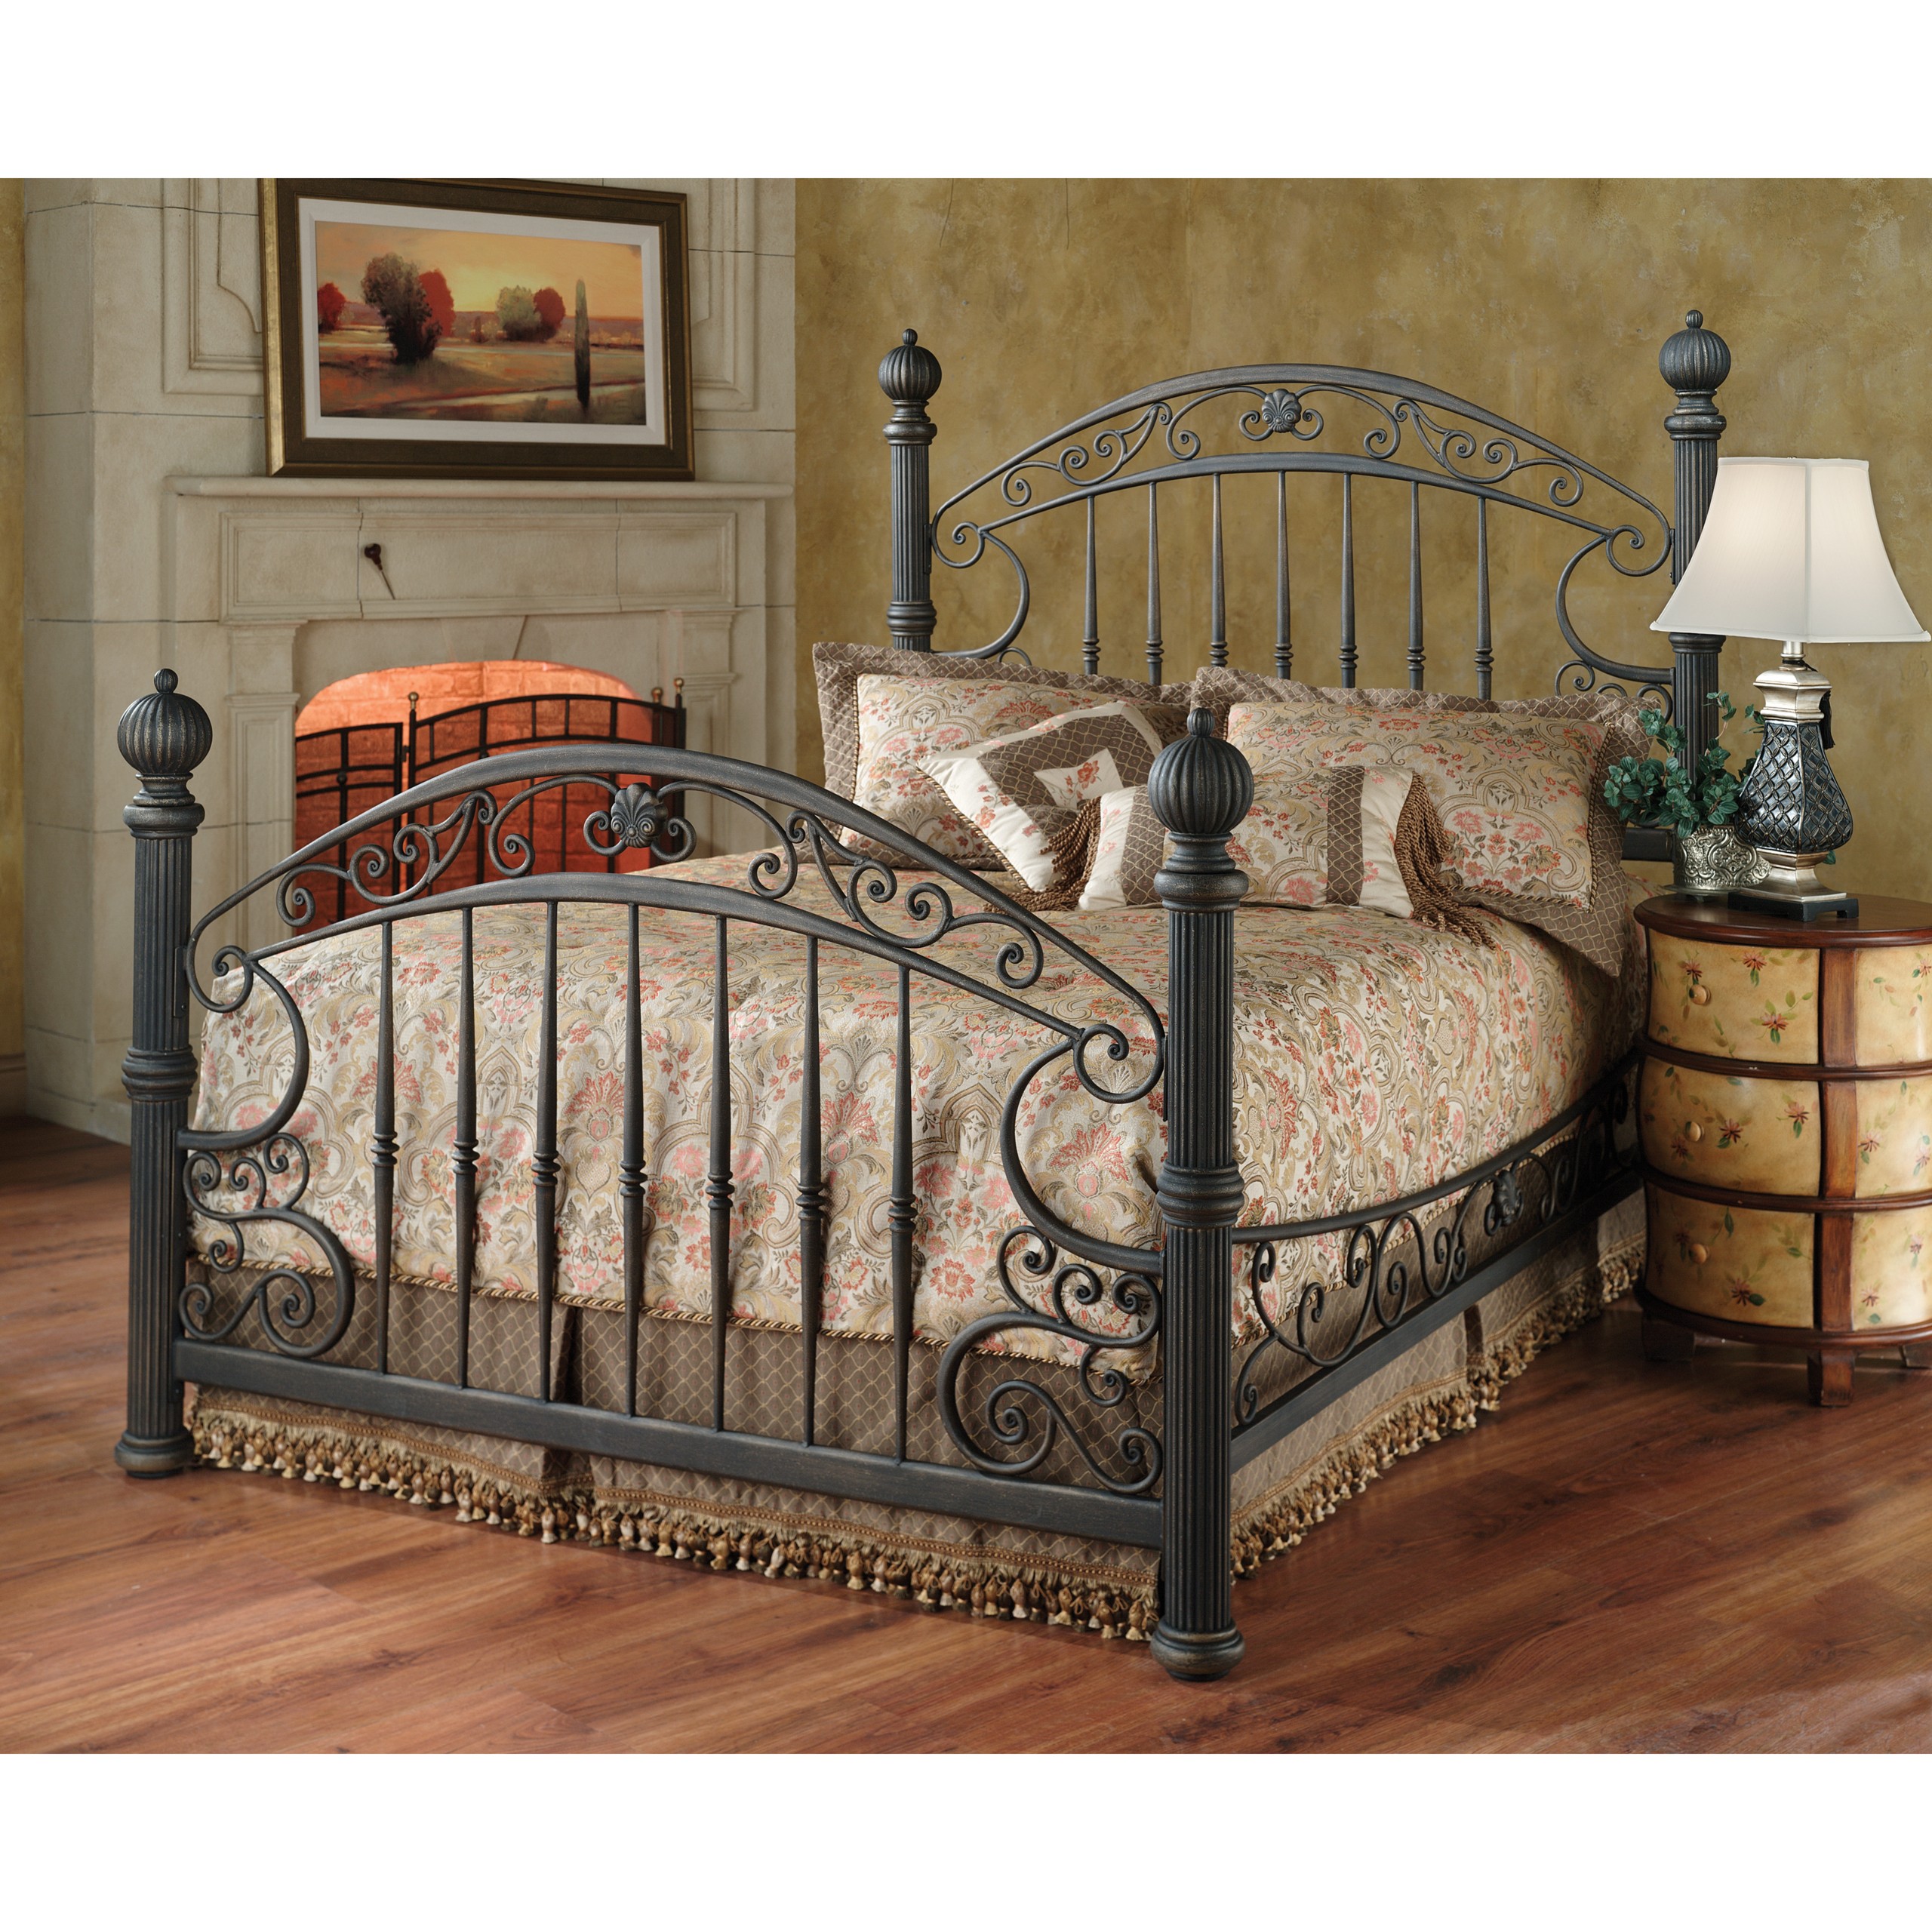 Hillsdale Furniture 1335BQR Chesapeake Bed Set with Rails, Queen, Rustic Old Brown